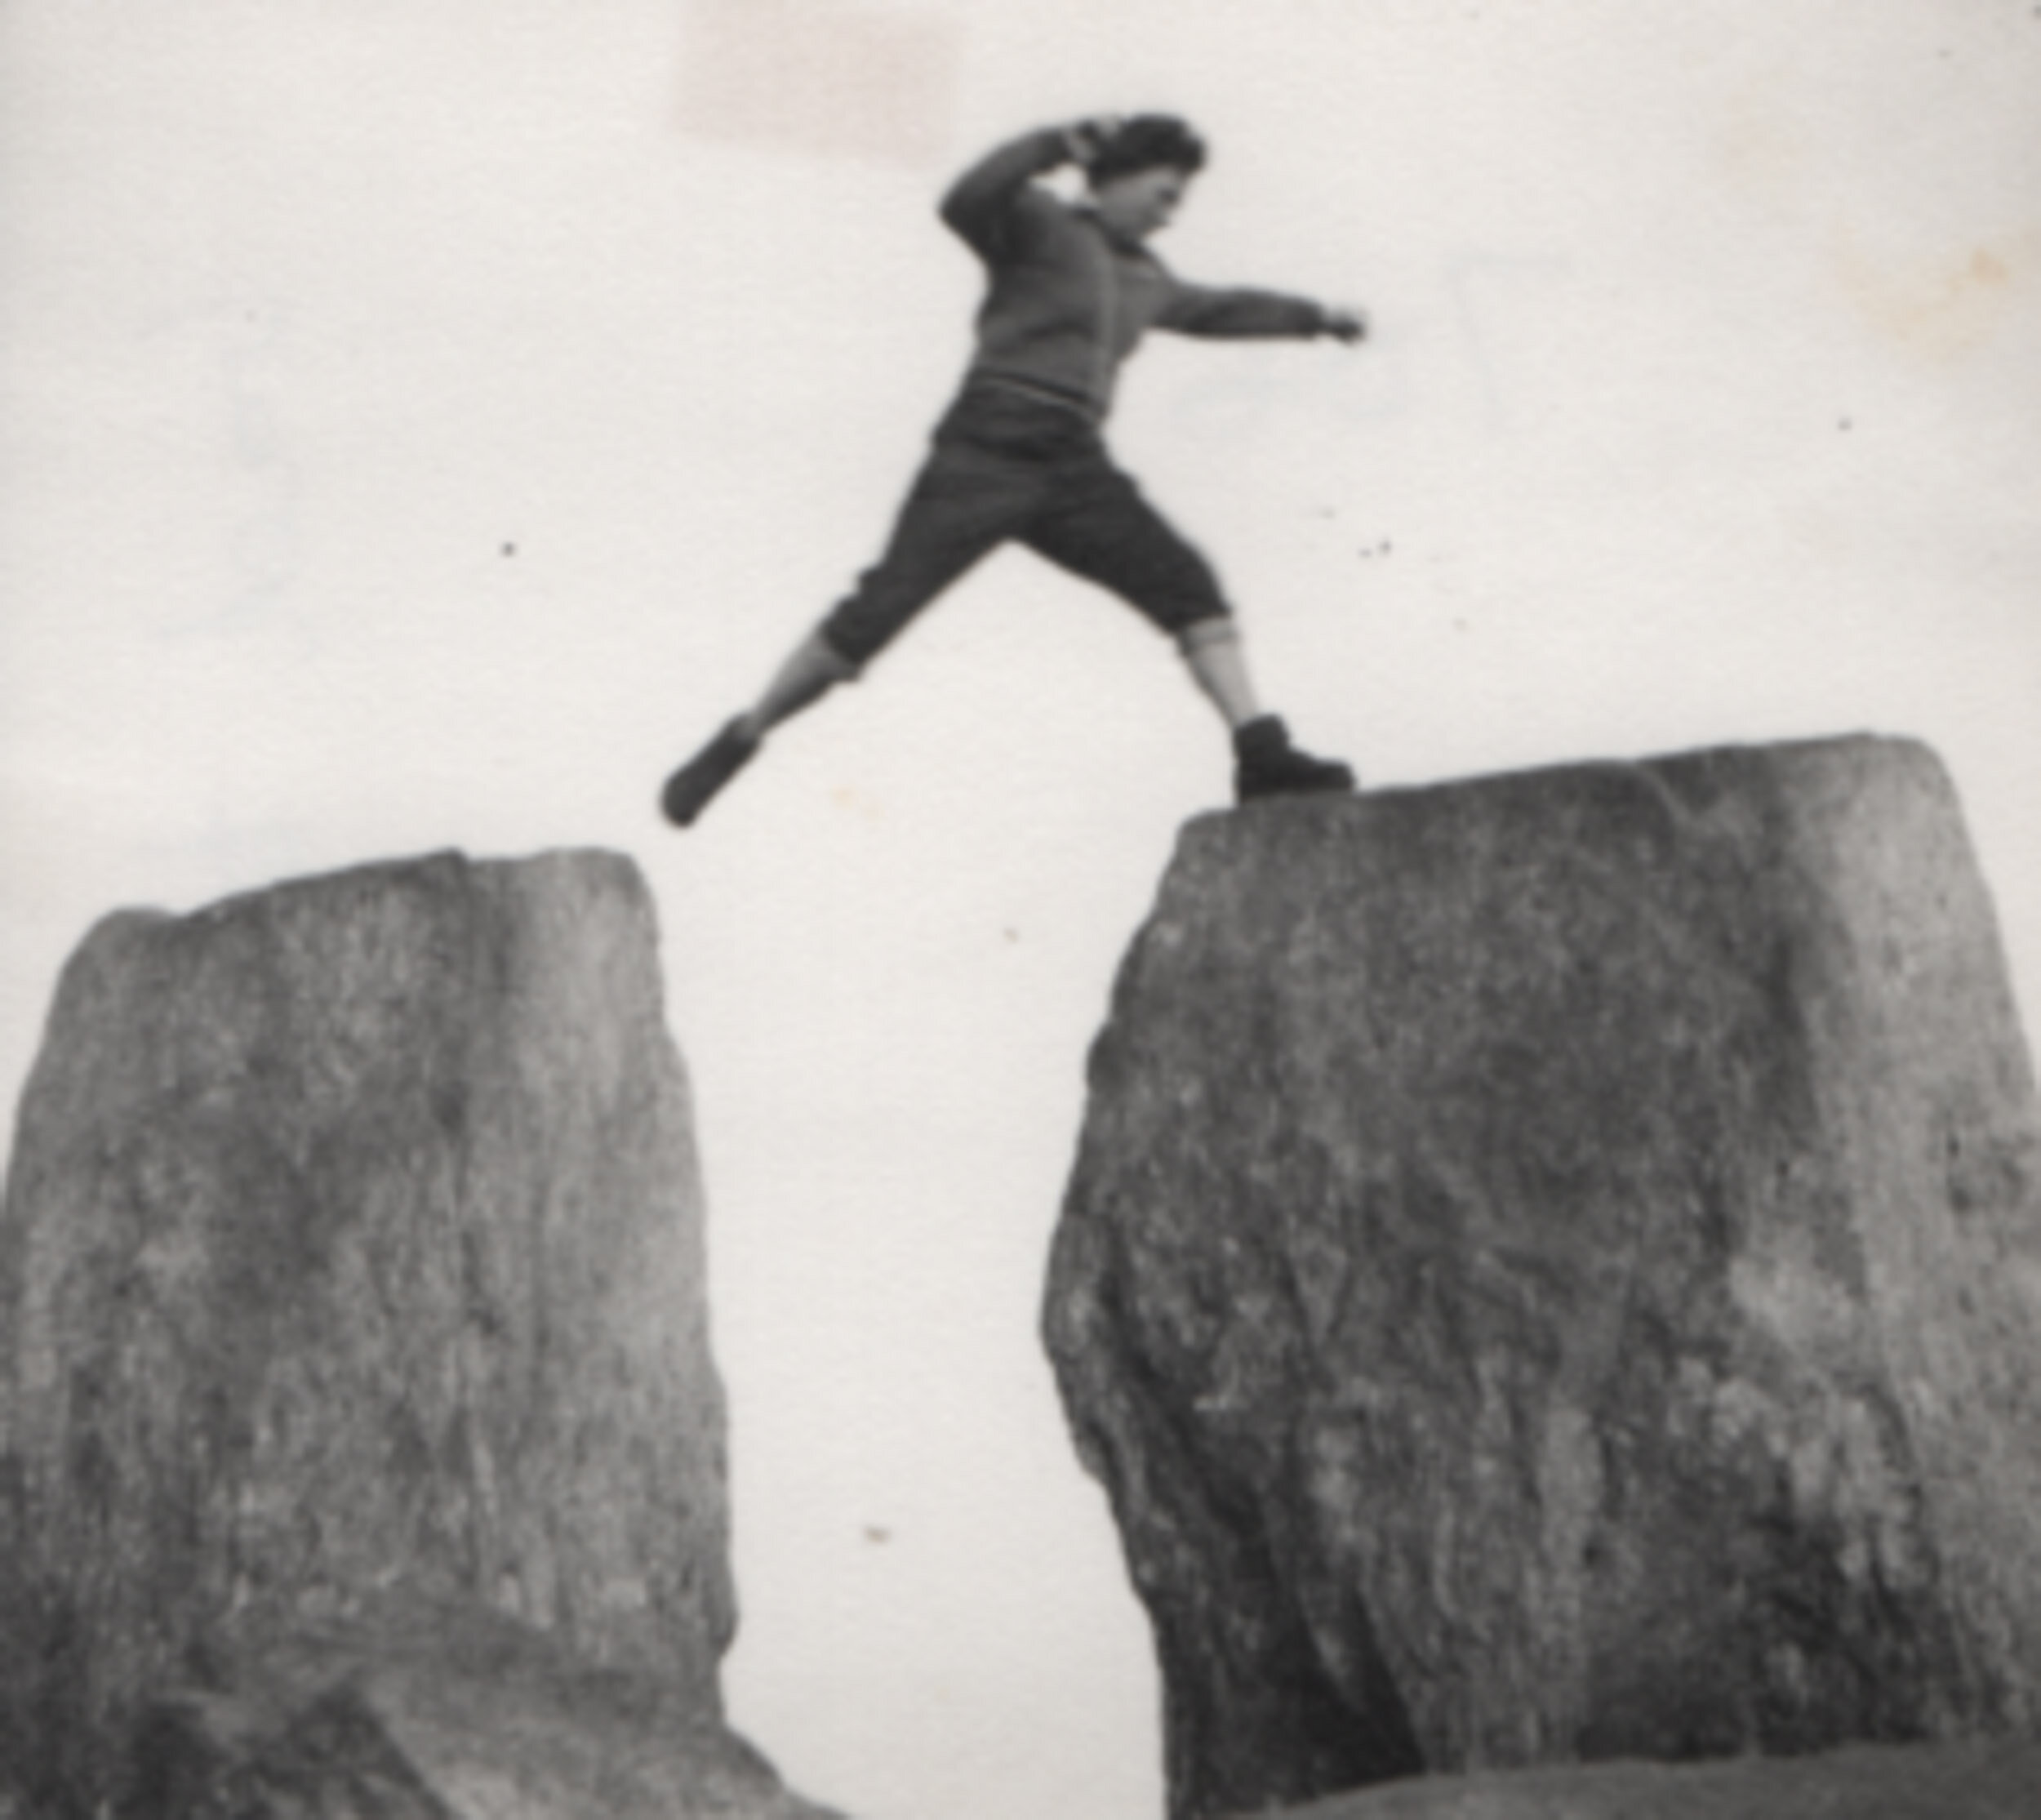 Frances Tanner scrambling on Adam and Eve, Tryfan, North Wales, in 1960